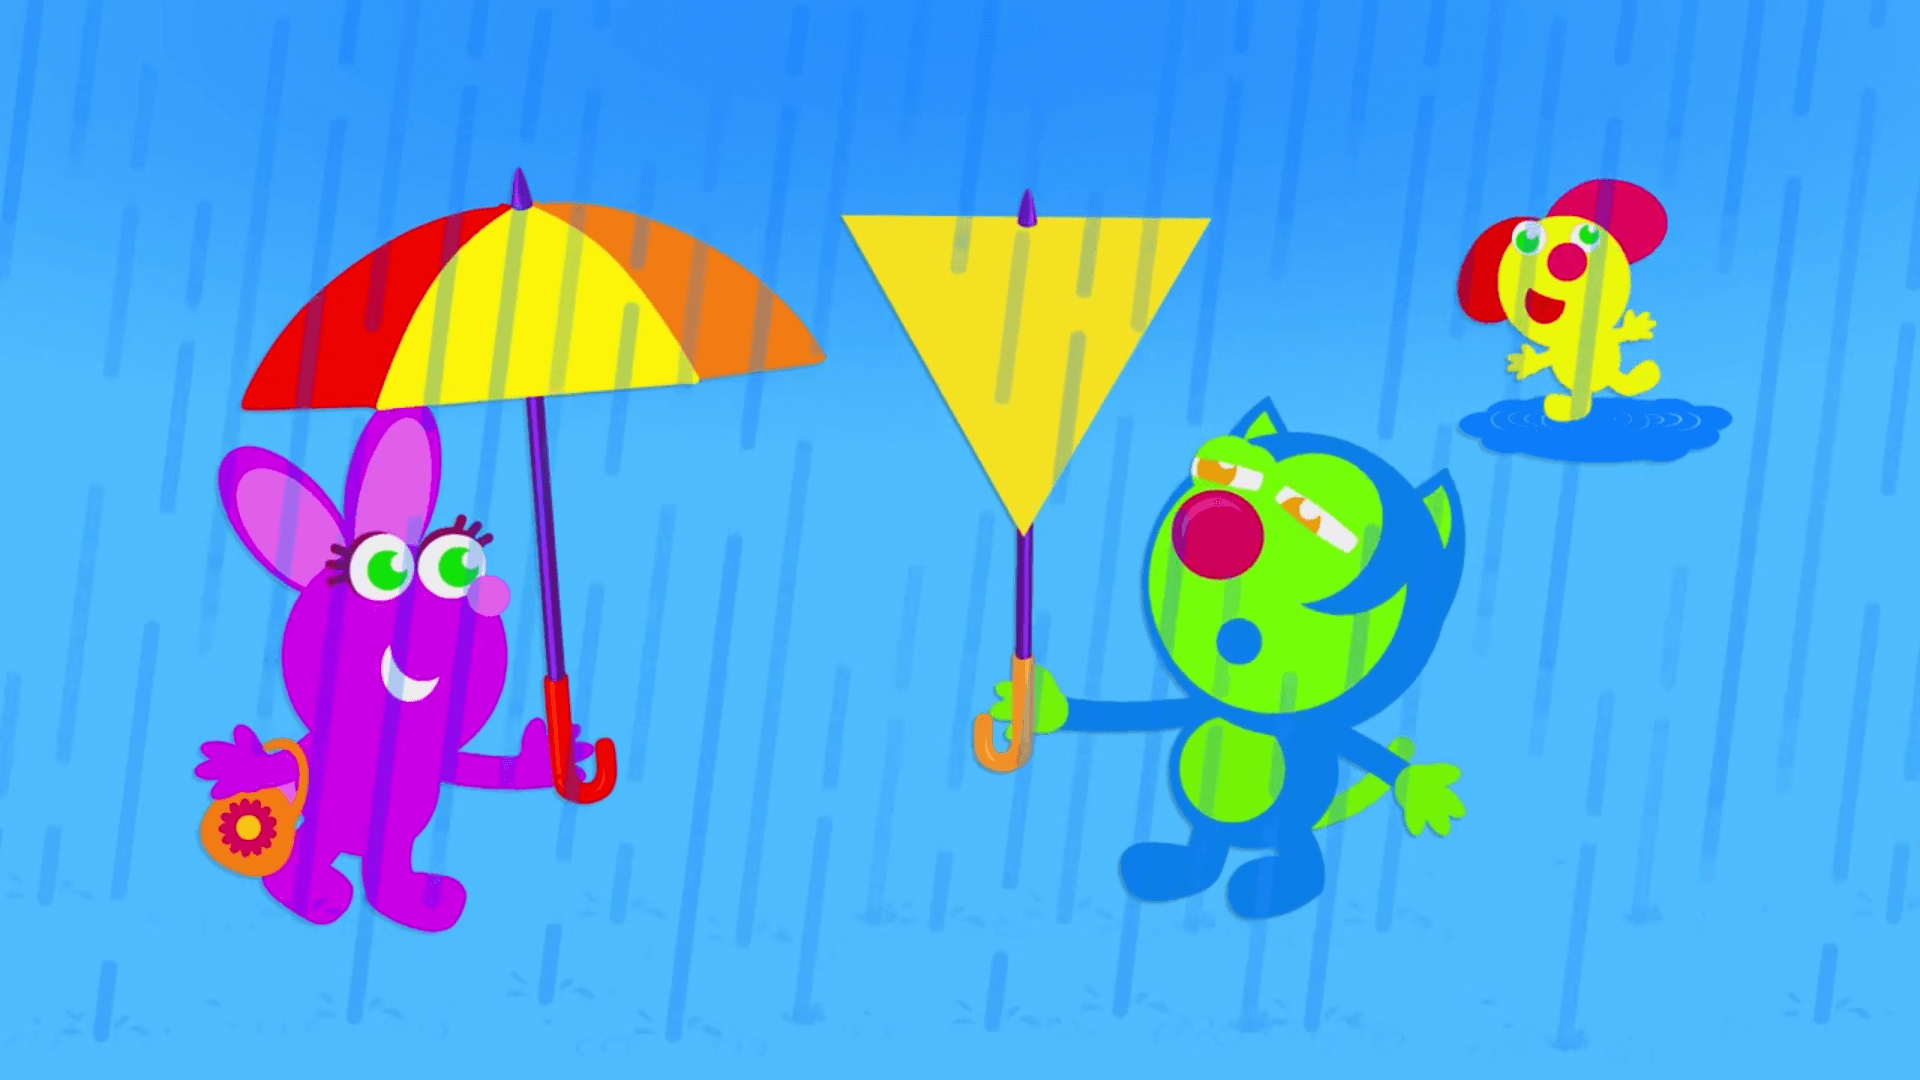 slycat tries to use umbrella in rain in triangles episode of the kneebouncers show on babyfirsttv